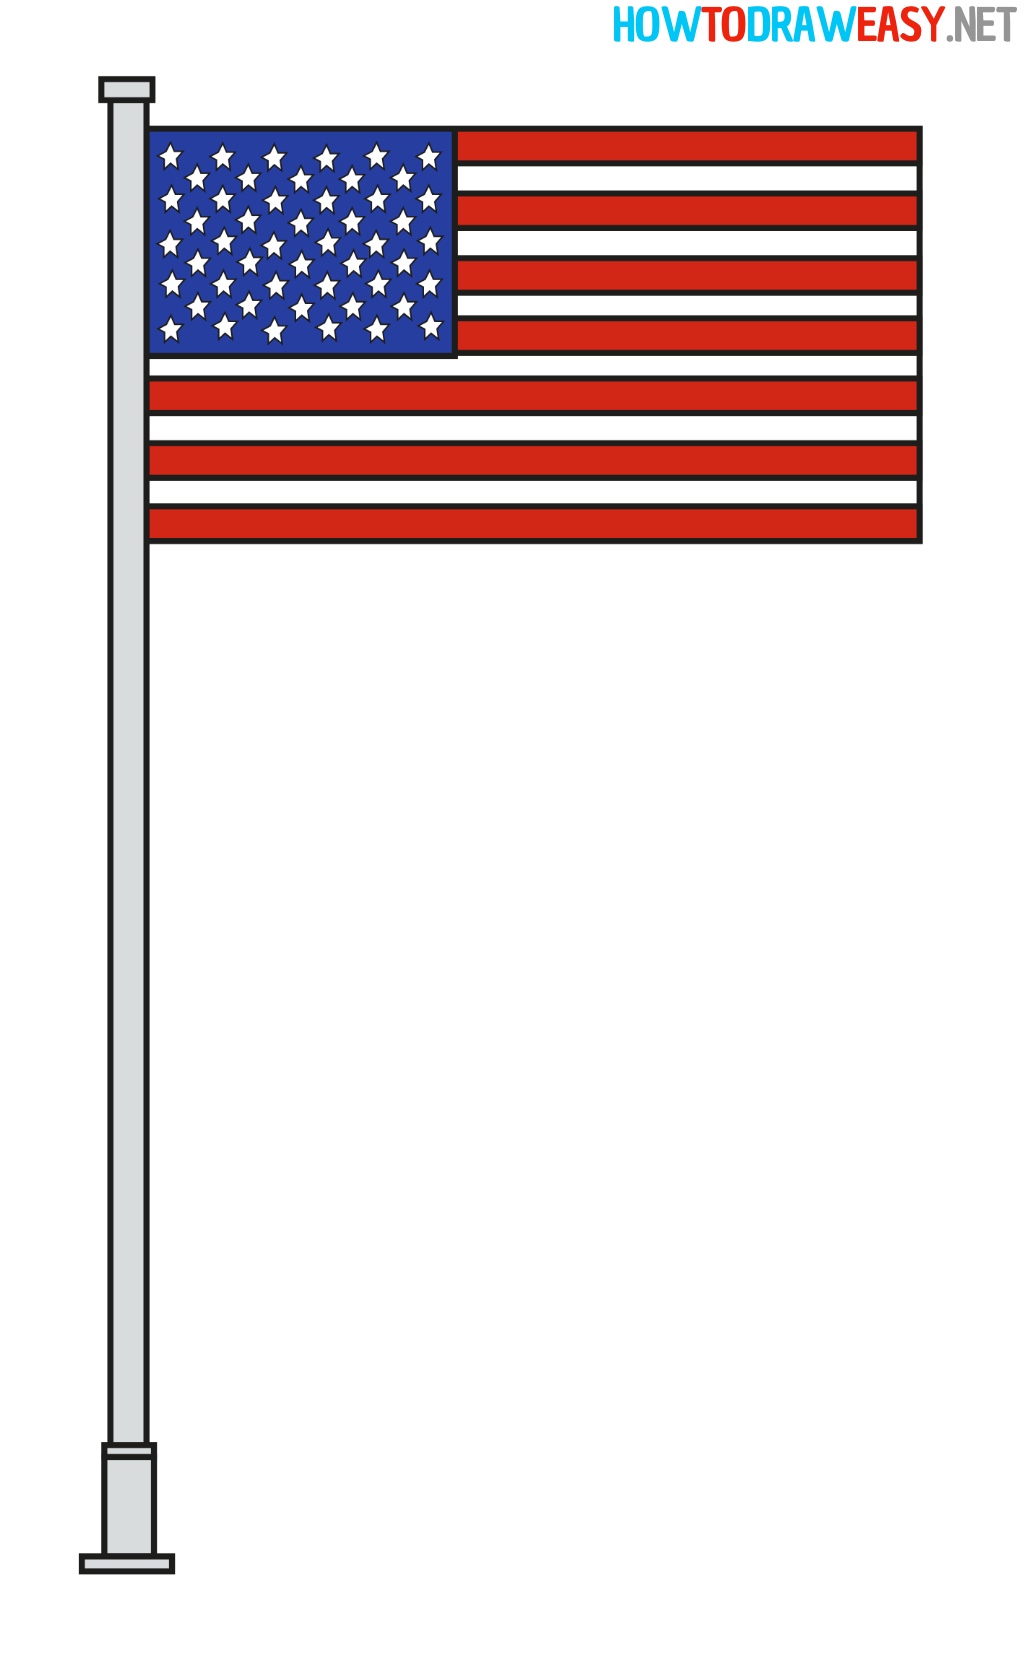 How to Draw a American Flag